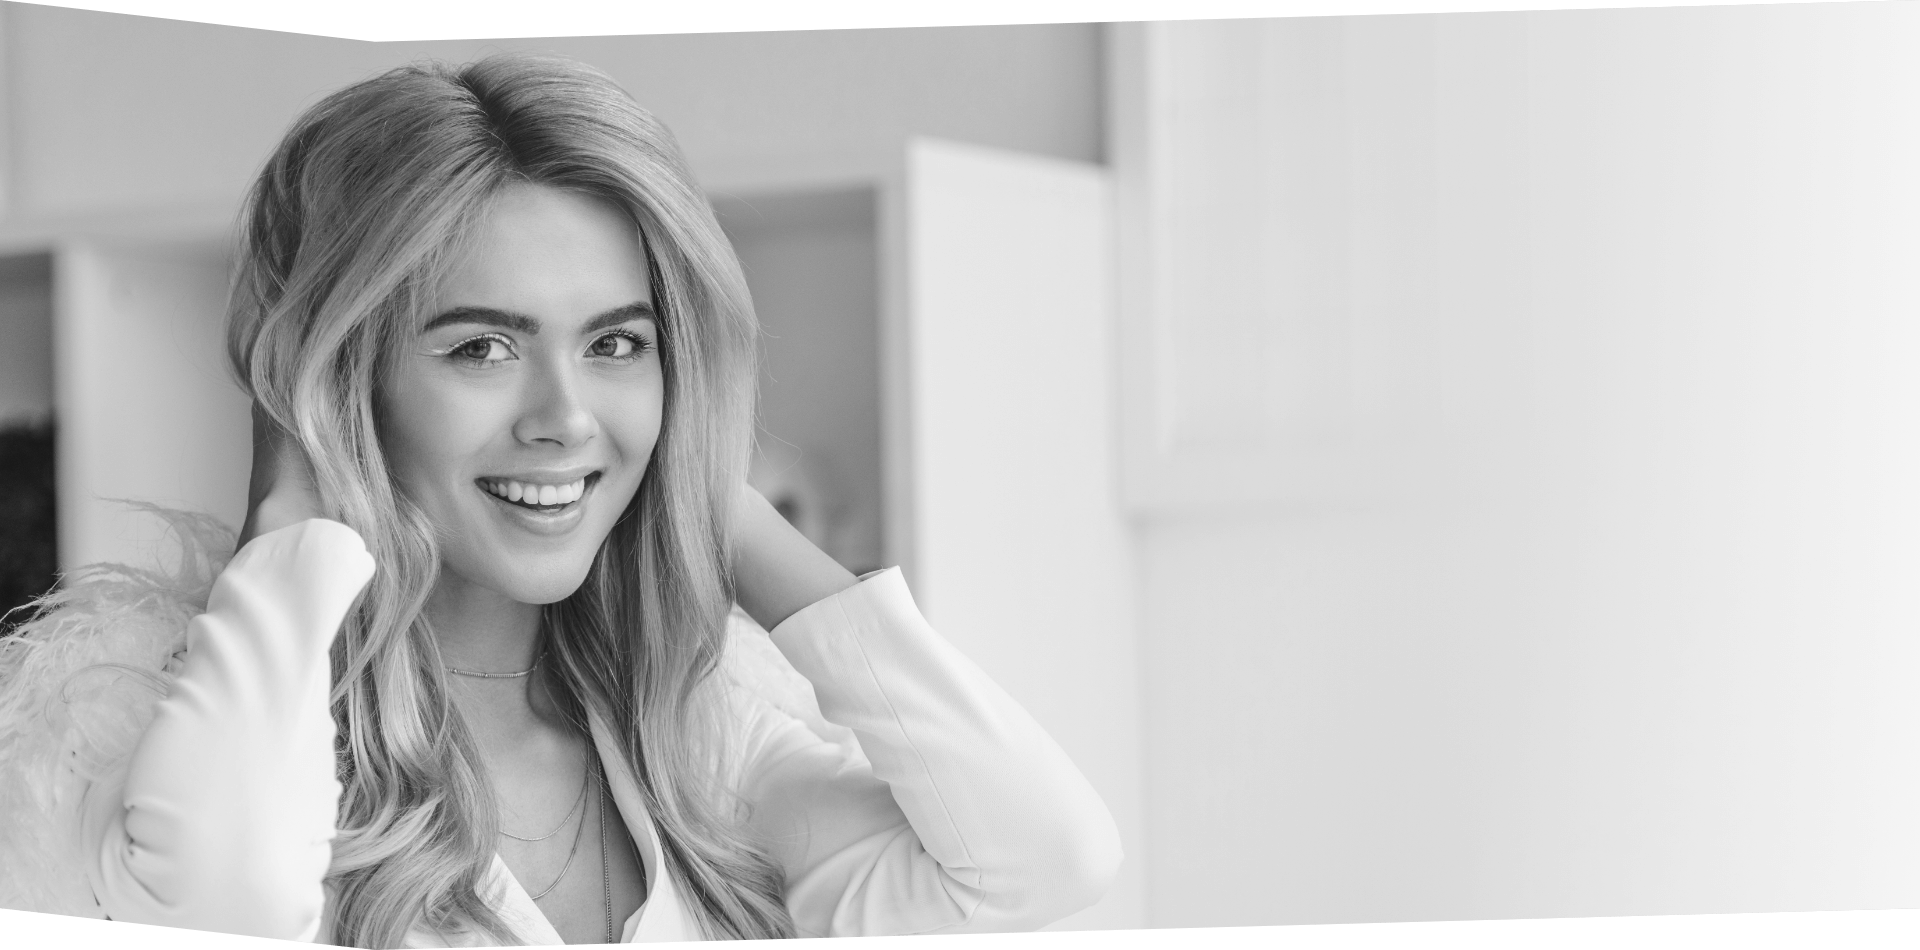 Smiling attractive woman